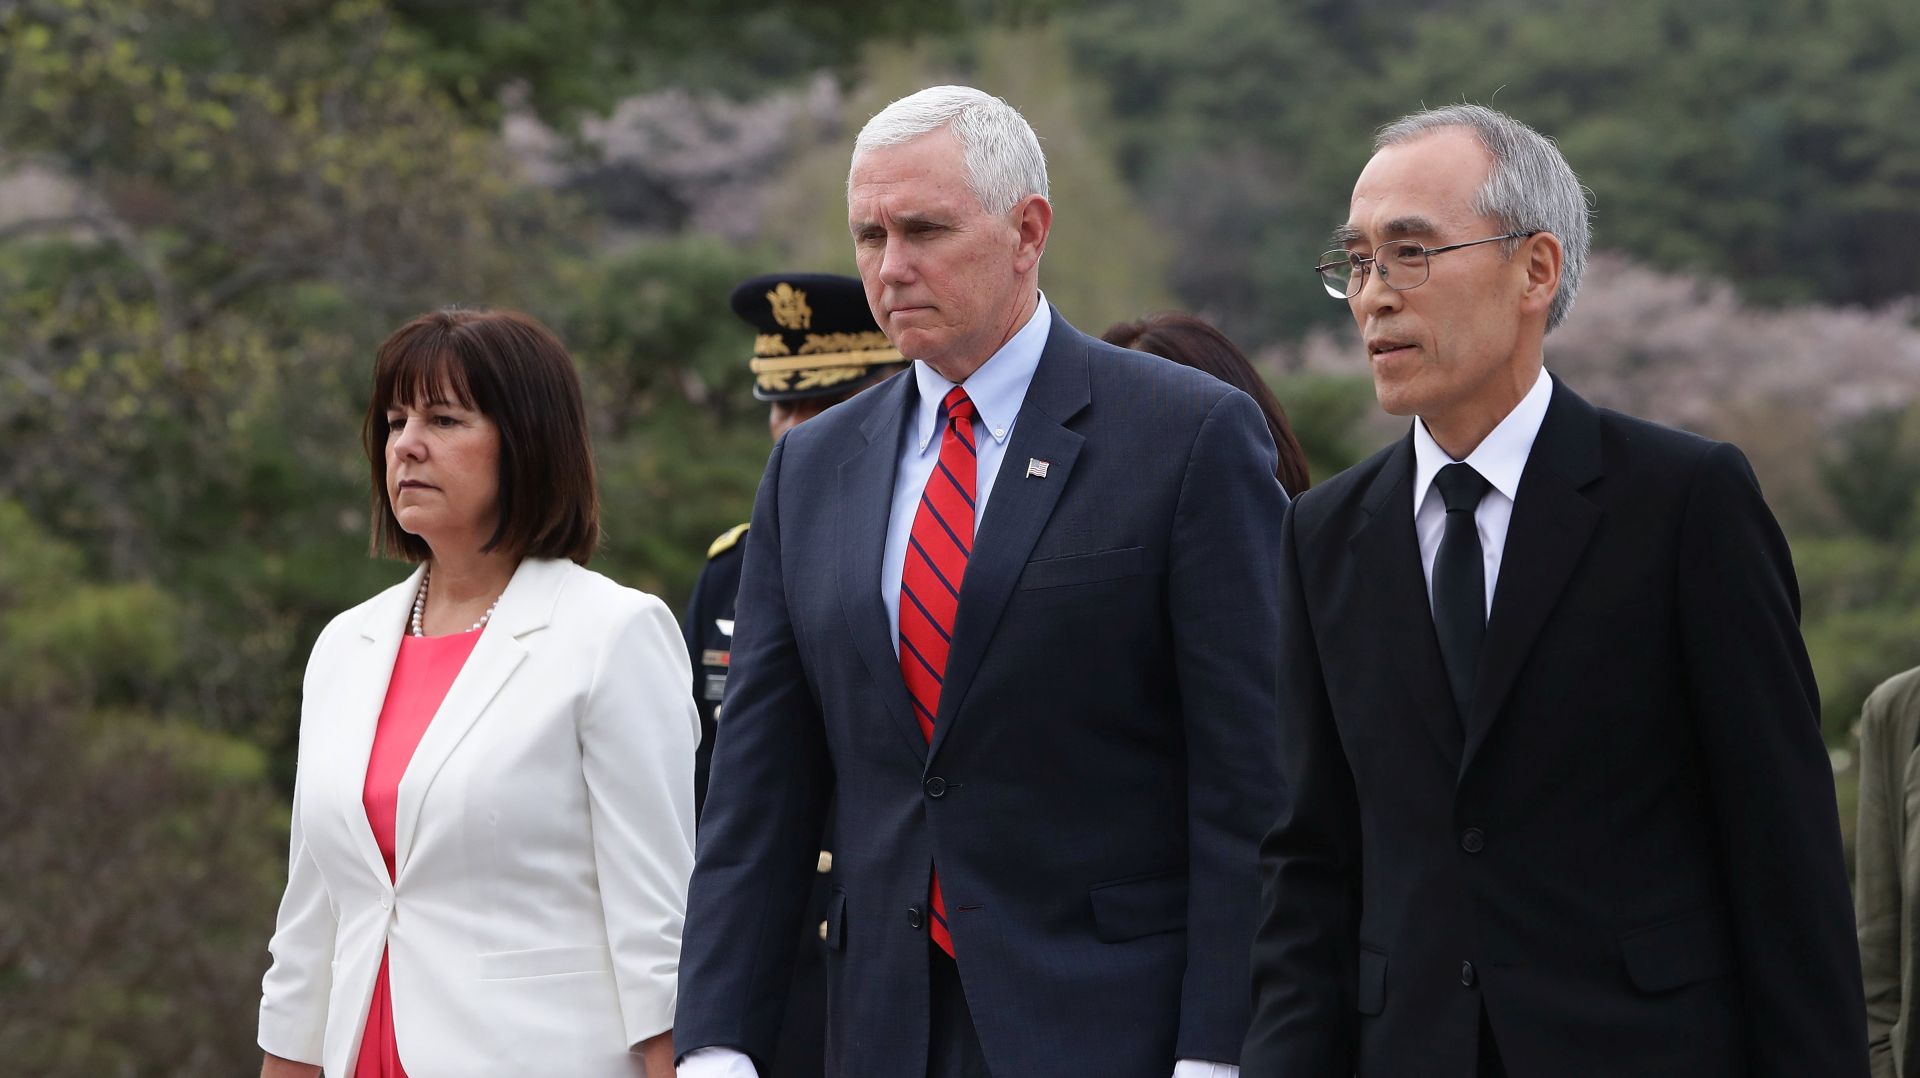 epa05910451 US Vice President Mike Pence (C) and his wife Karen Pence (L) visit Seoul National Cemetery, in Seoul, South Korea, 16 April 2017. US Vice President Mike Pence arrived in South Korea on a three-day visit amid tensions over nuclear issues in the Korean Peninsula.  EPA/Chung Sung-Jun / POOL